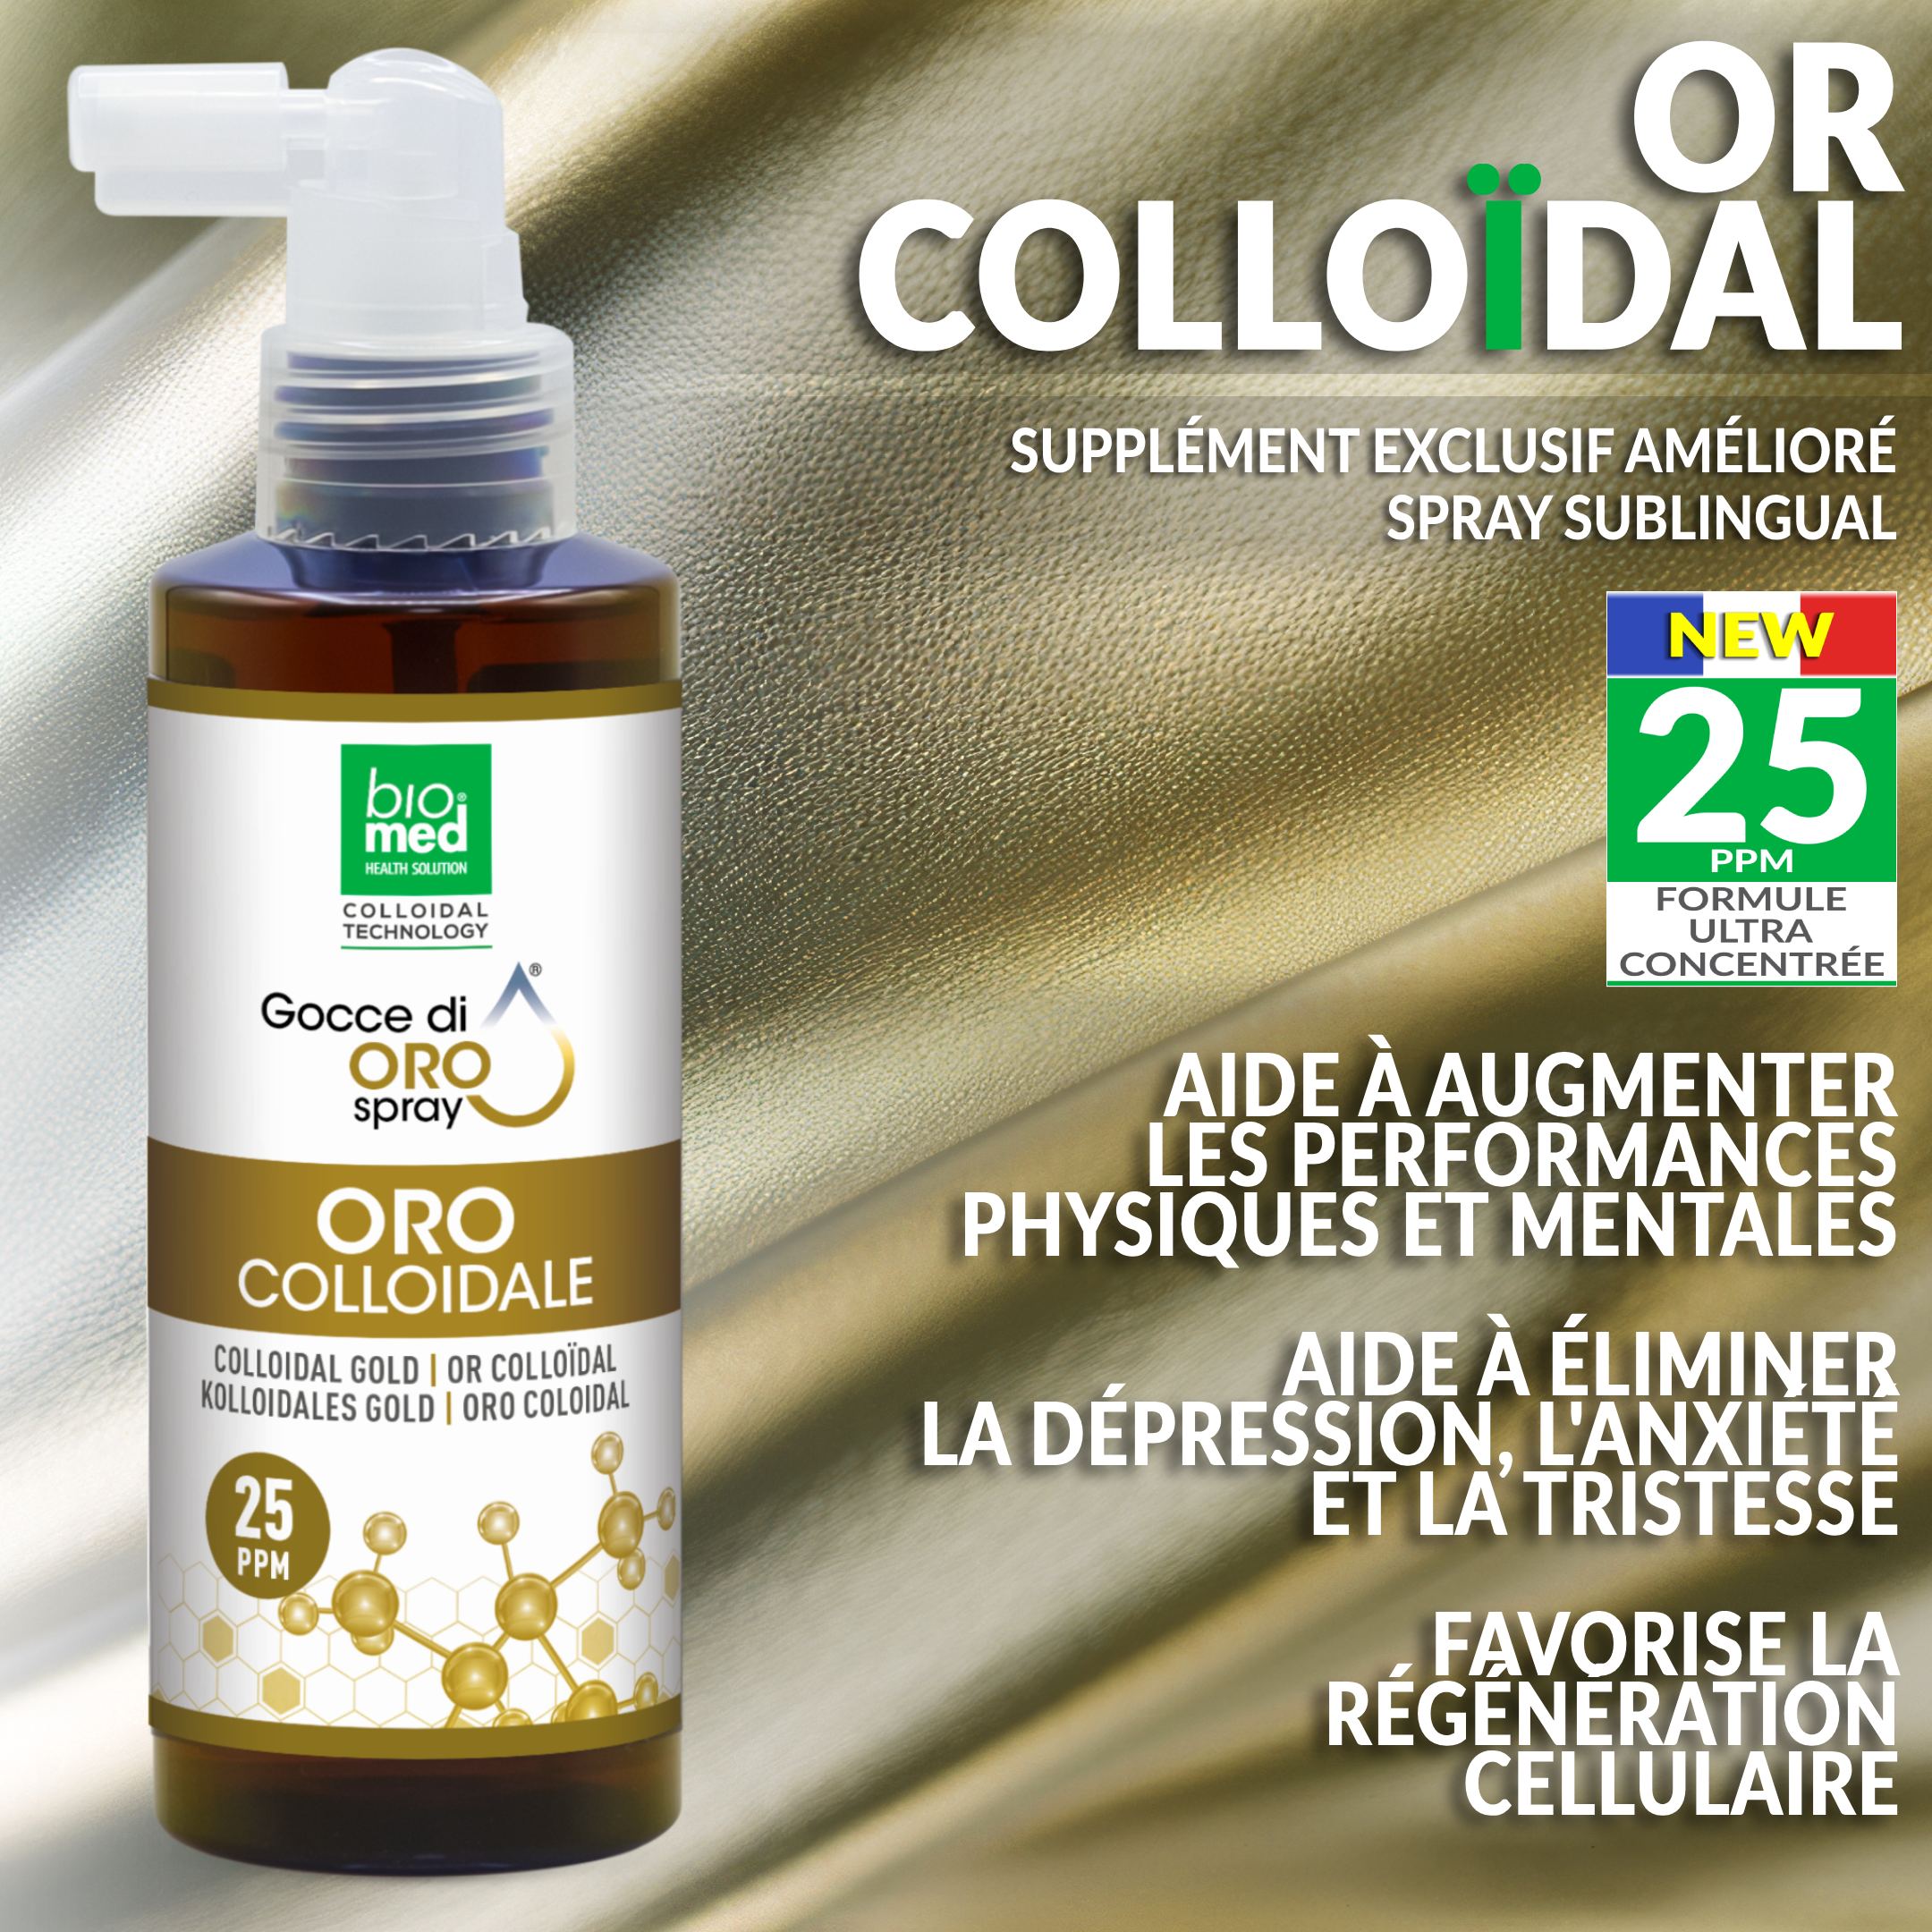 OR COLLOÏDAL SPRAY SUBLINGUAL PUR - GOUTTES NANO BIOMED - 150 ML - 25 PPM